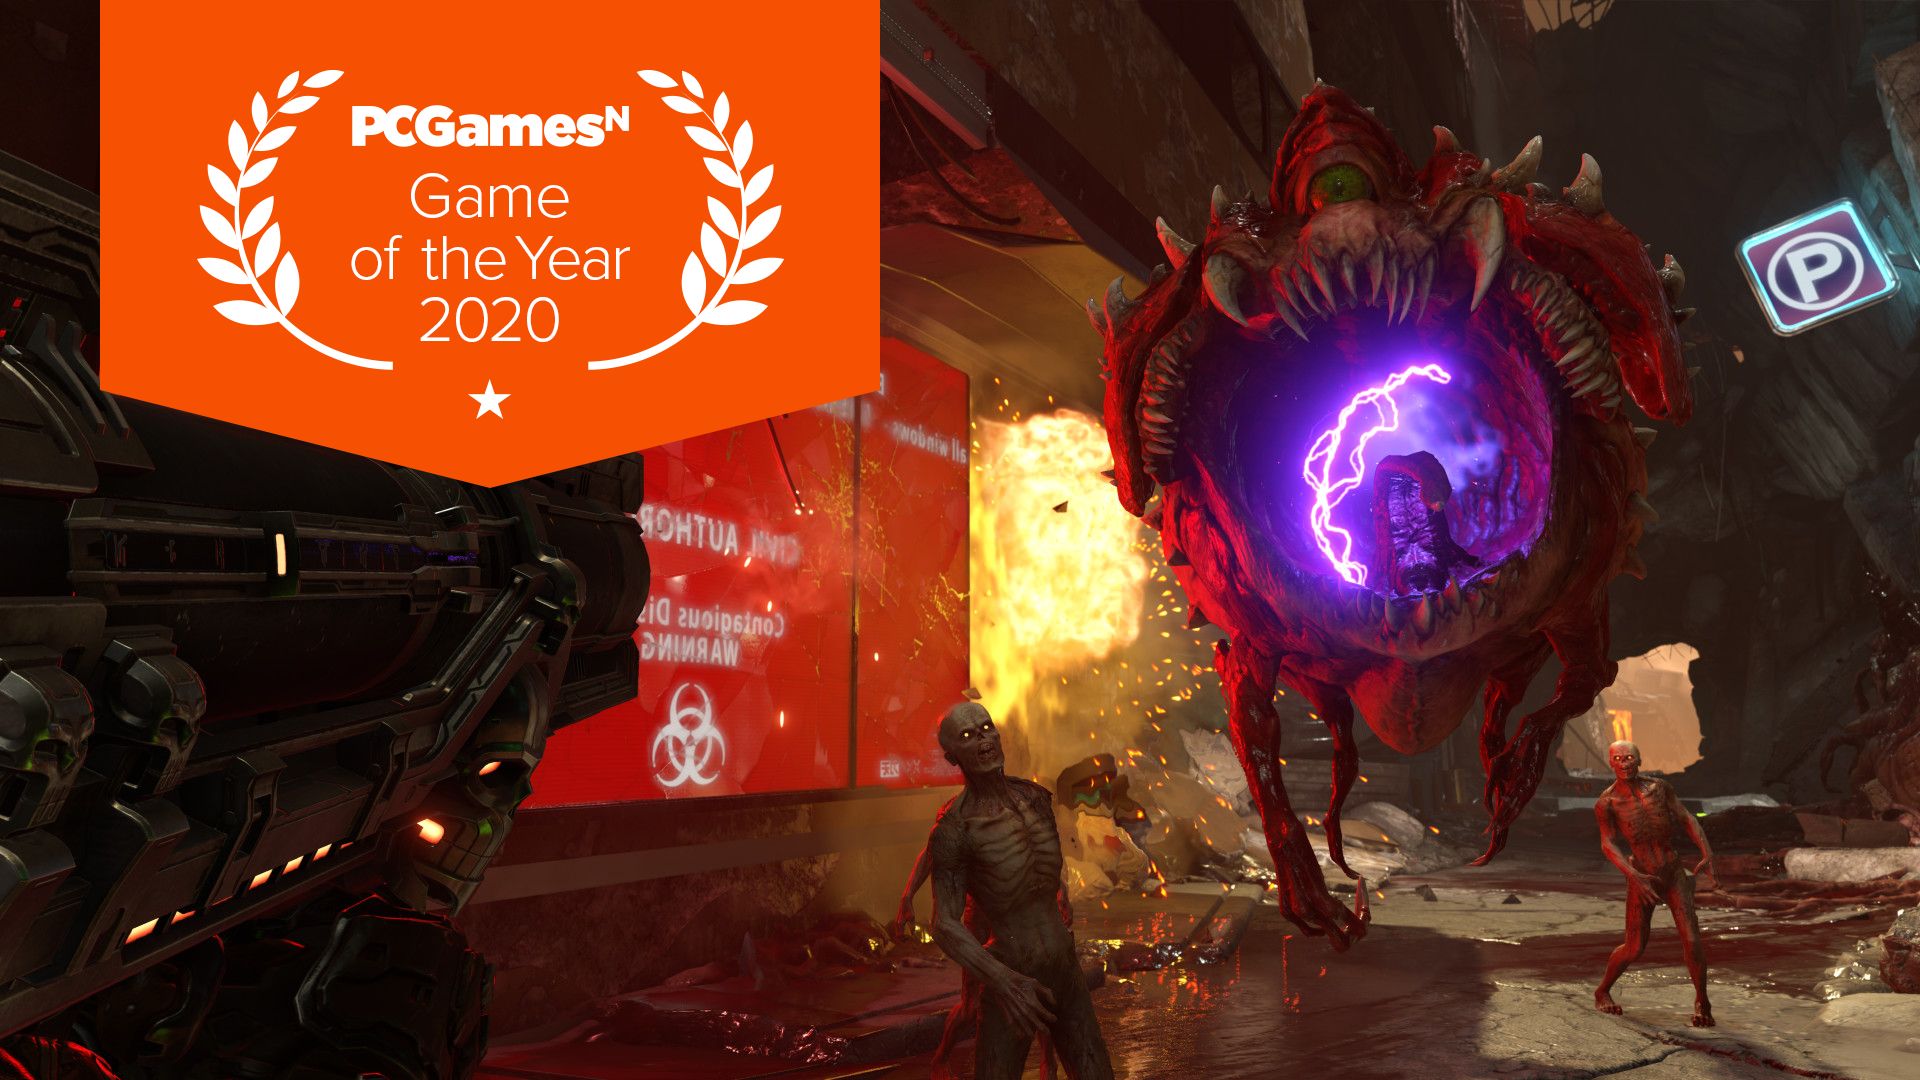 The PCGamesN Games of the Year 2020